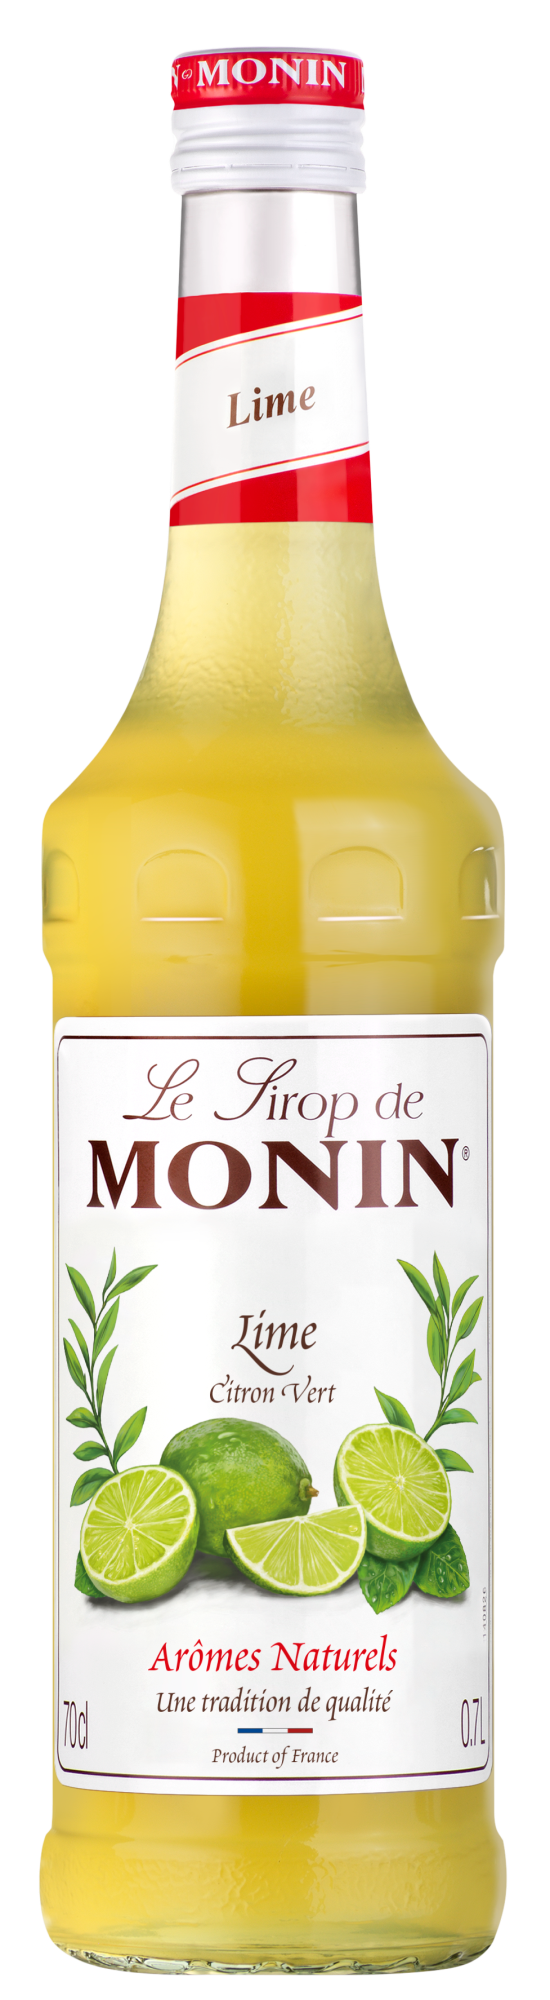 Buy MONIN Lime syrup. It is perfect for cocktails, lime is used for both the acidity of the juice & floral aroma of the rind.